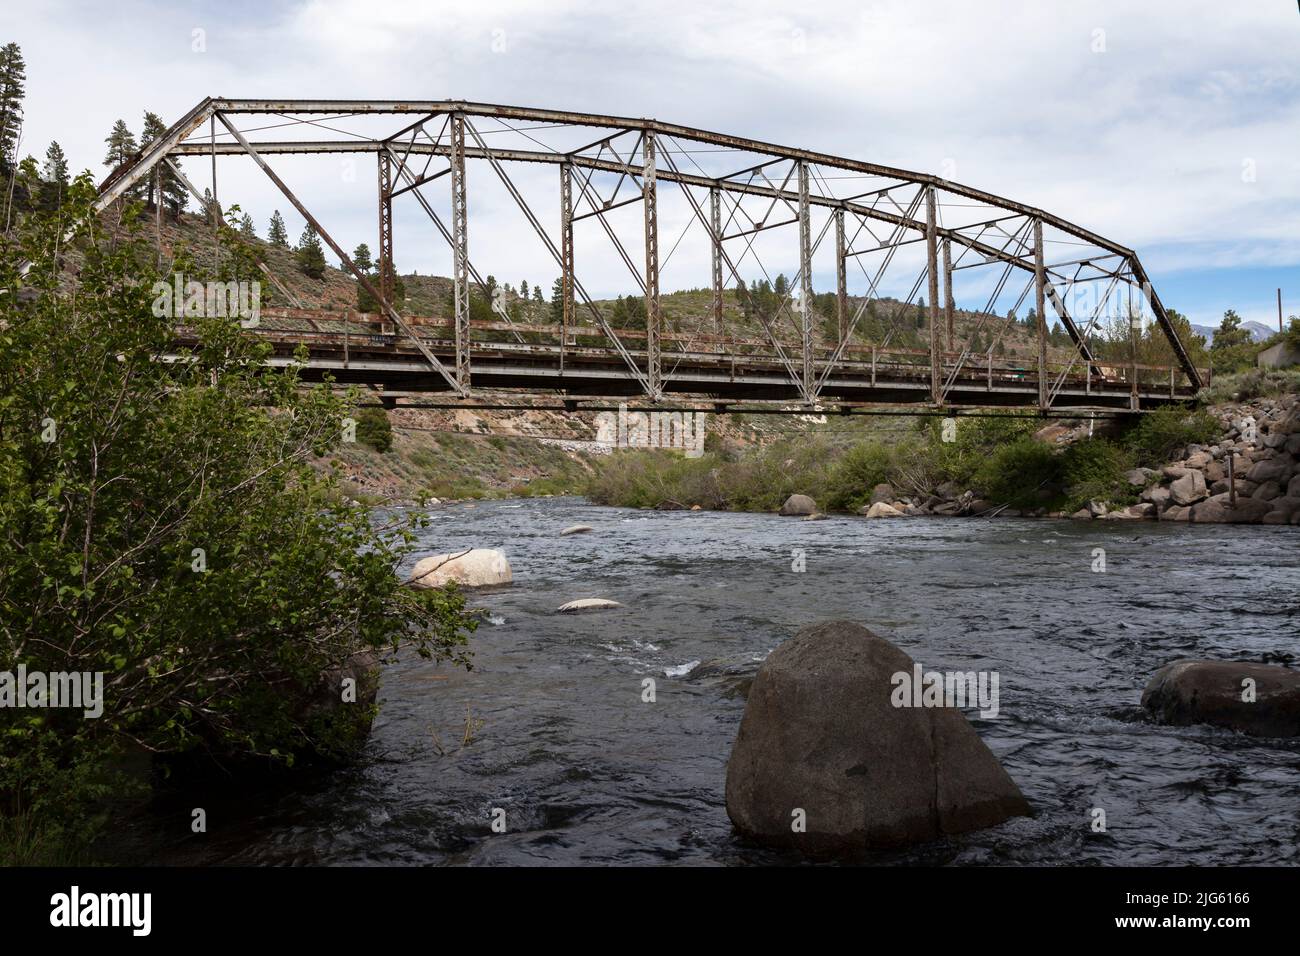 Parker pin-connected through truss bridge with a wooden deck crosses the Truckee River at Boca, California. Stock Photo